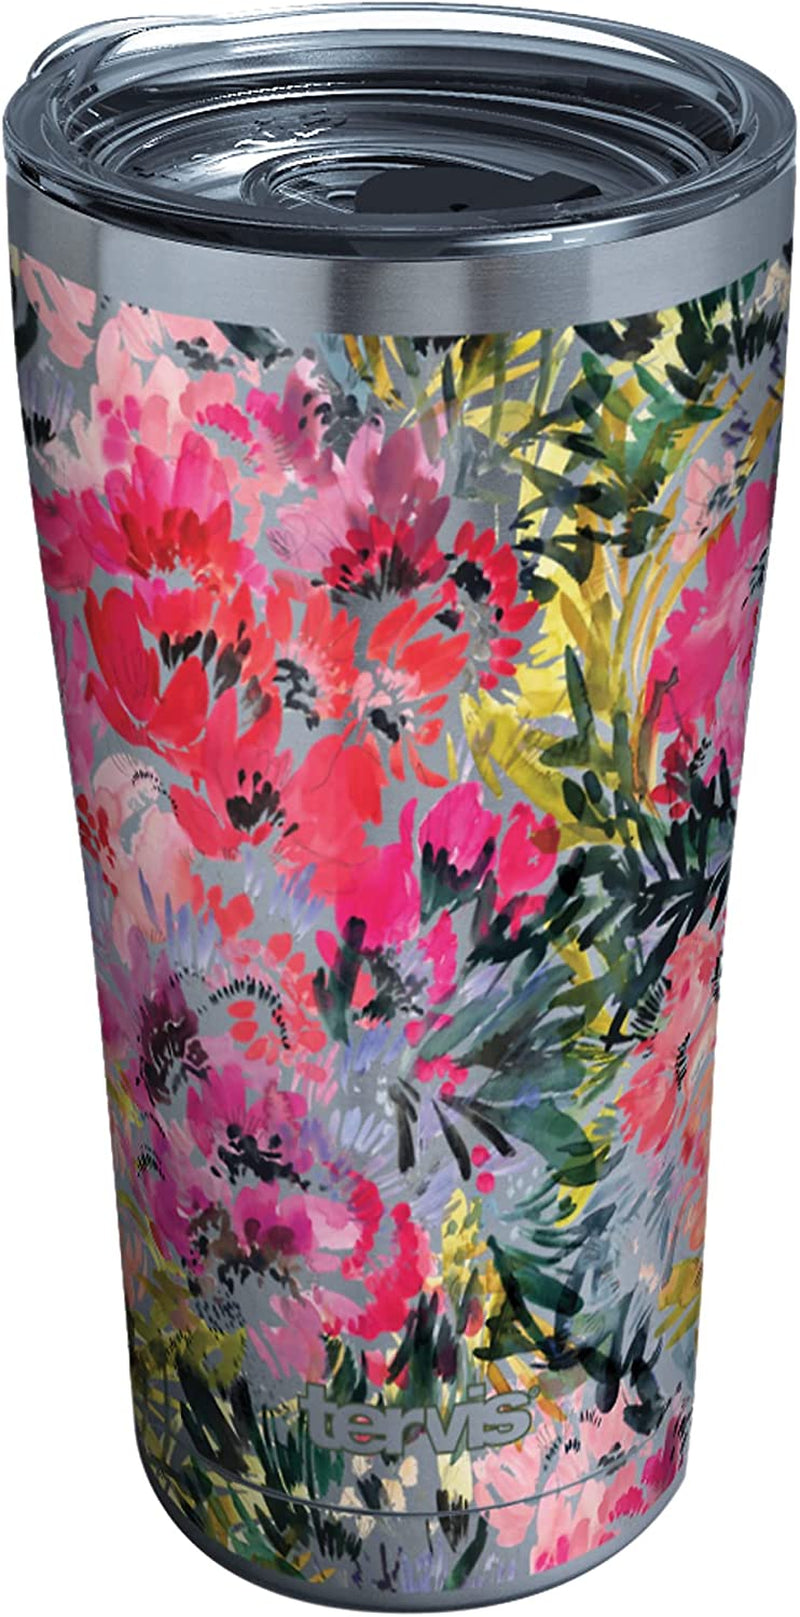 Tervis Made in USA Double Walled Kelly Ventura Floral Collection Insulated Tumbler Cup Keeps Drinks Cold & Hot, 16Oz 4Pk - Classic, Assorted Home & Garden > Kitchen & Dining > Tableware > Drinkware Tervis Perennial Garden 20oz - Stainless Steel 